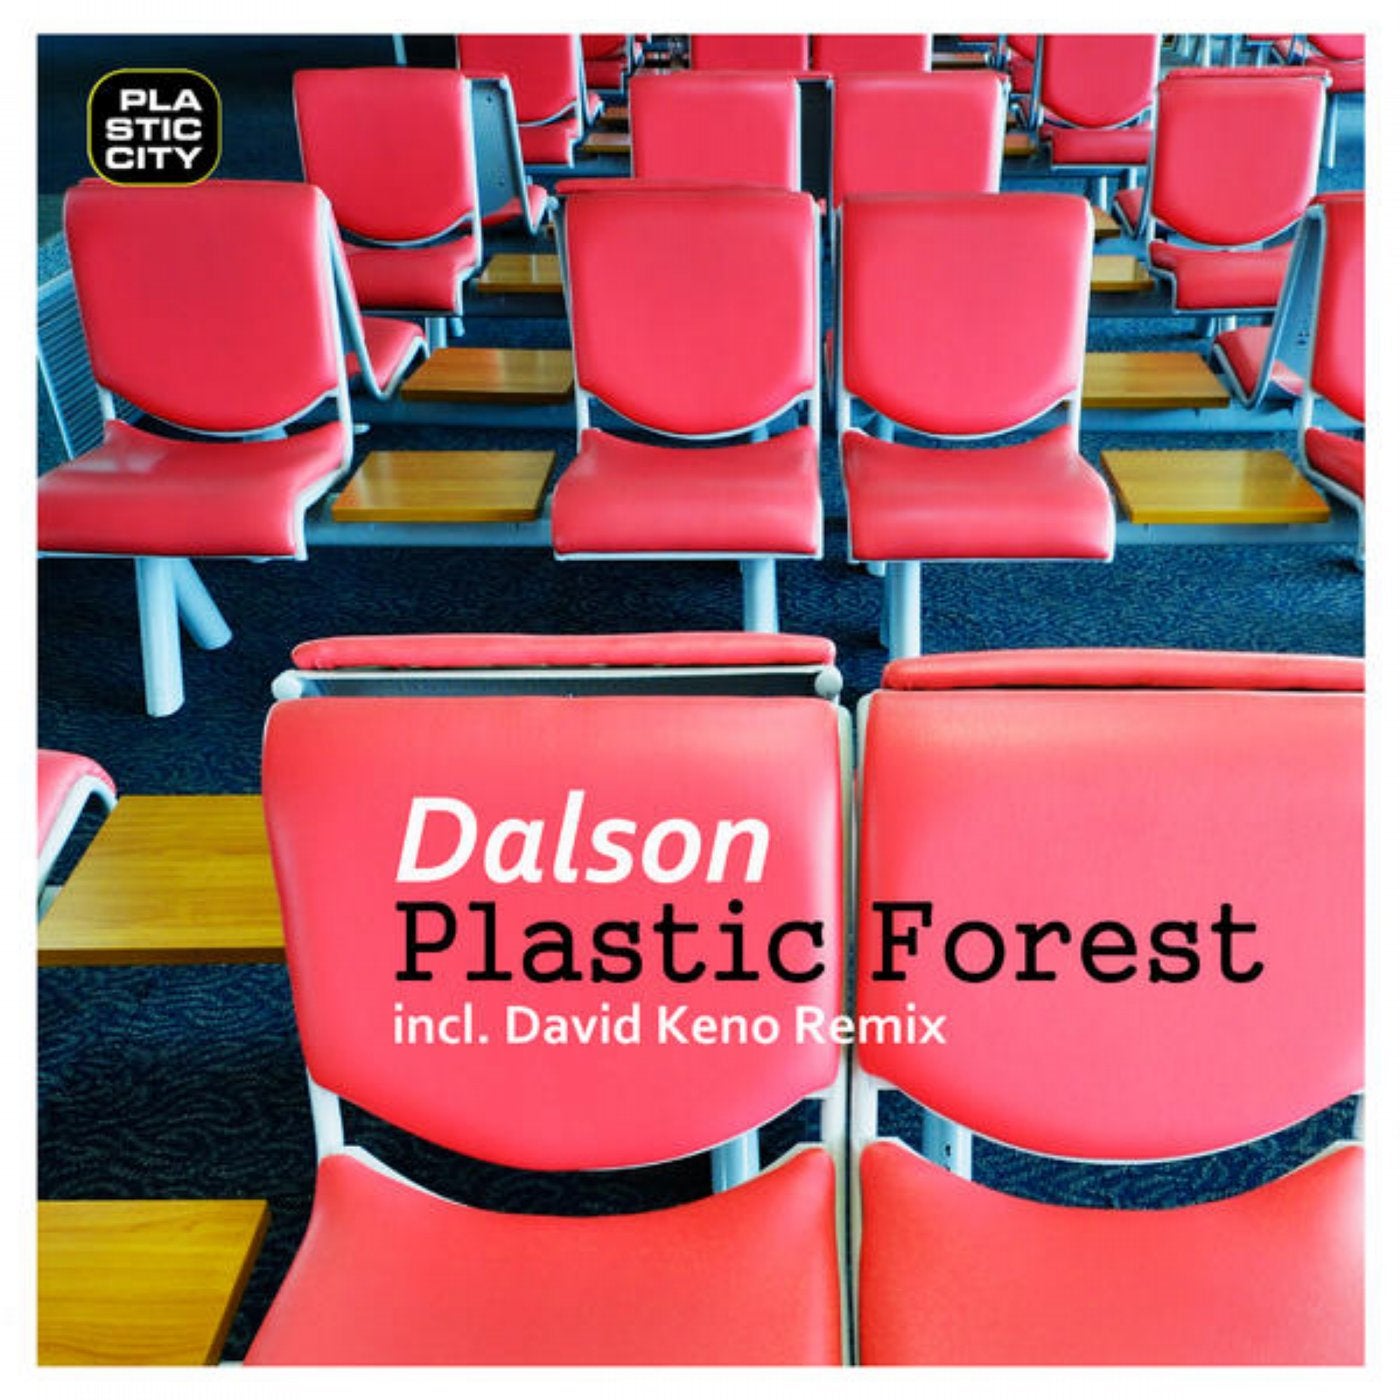 Plastic Forest